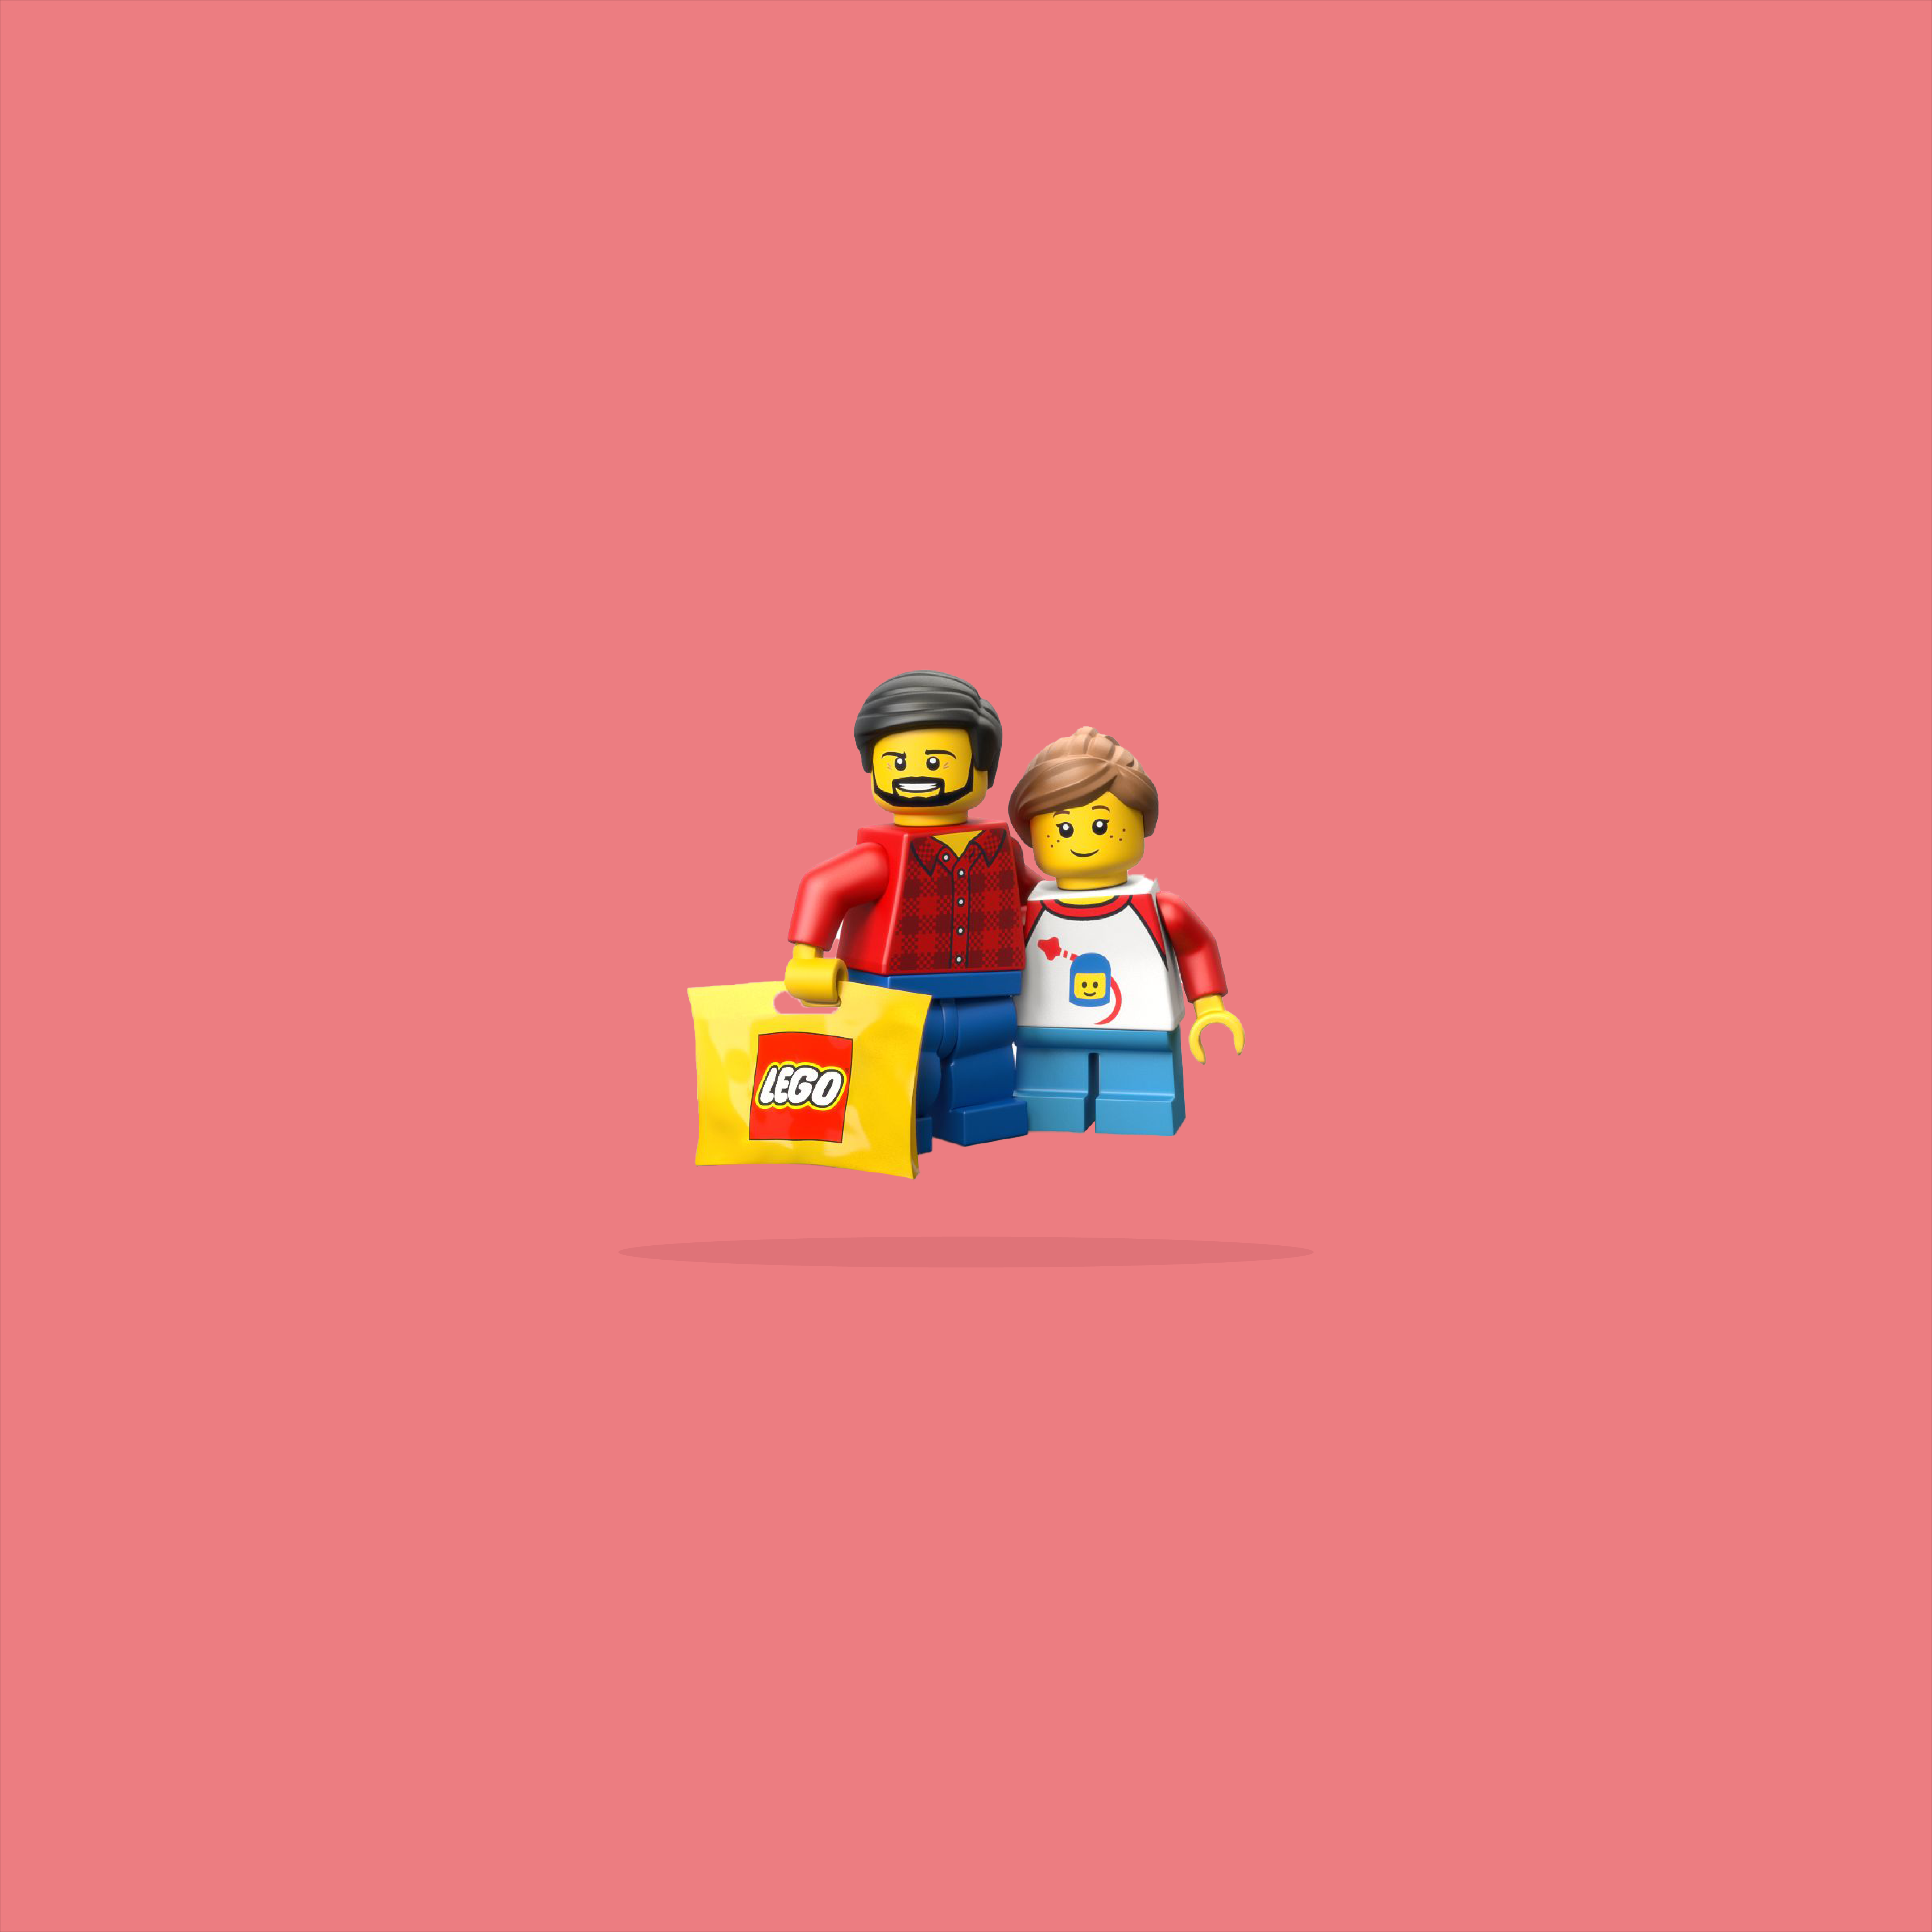 Decoding LEGO’s Shift: Why Targeting Adults Became a Winning Strategy